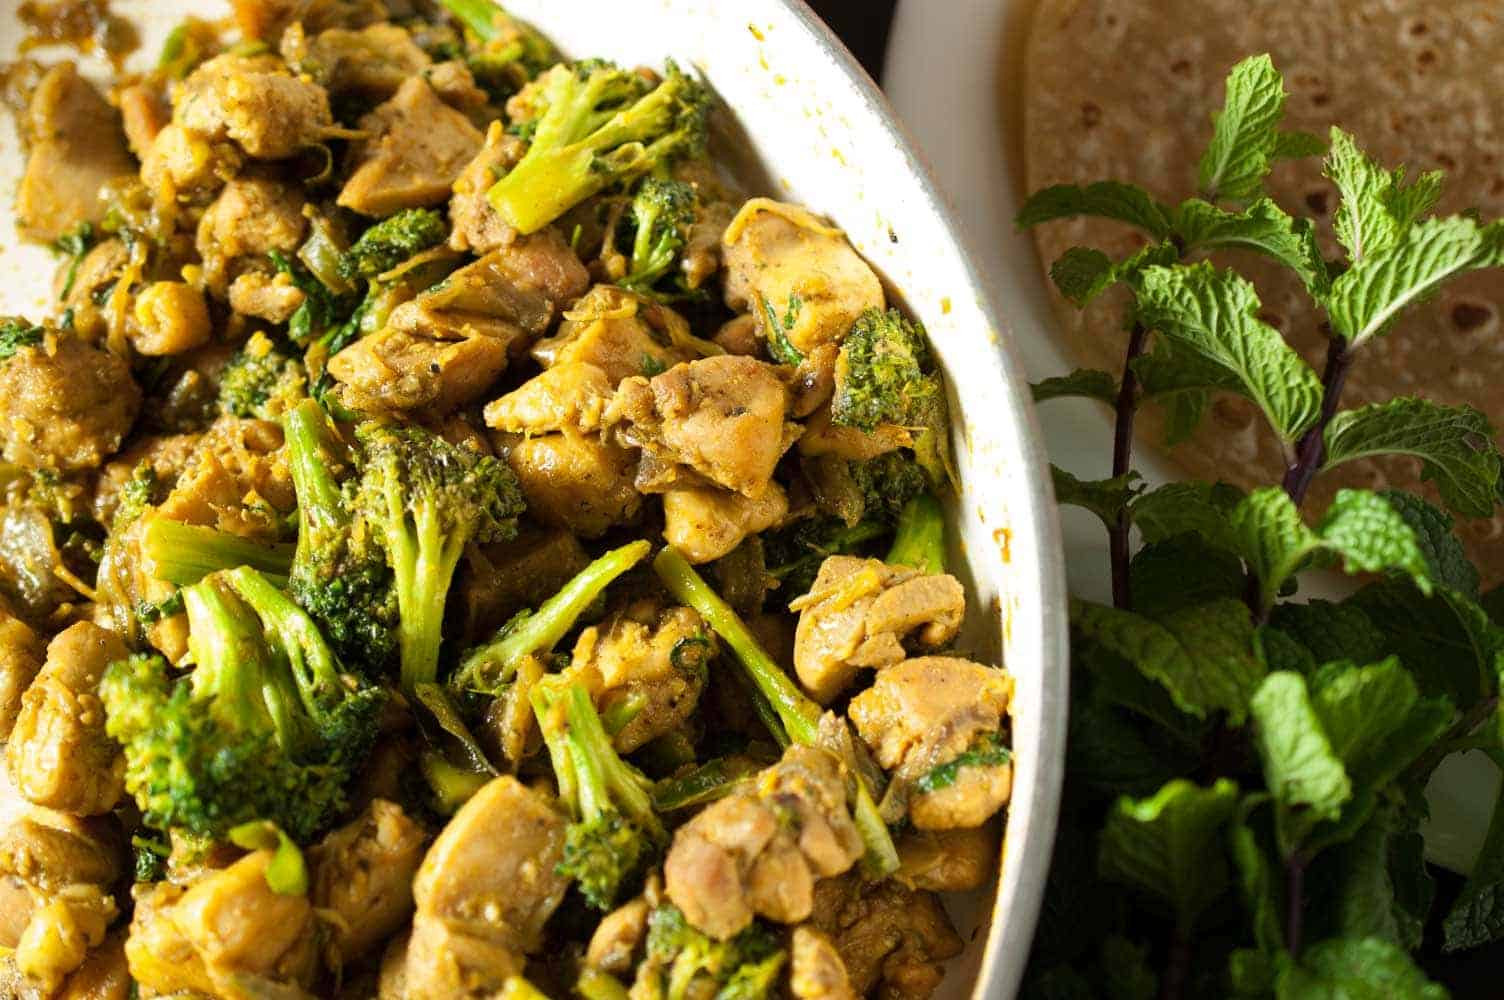 Healthy Chicken And Broccoli Recipes
 Indian Healthy Chicken and Broccoli Stir Fry Recipe